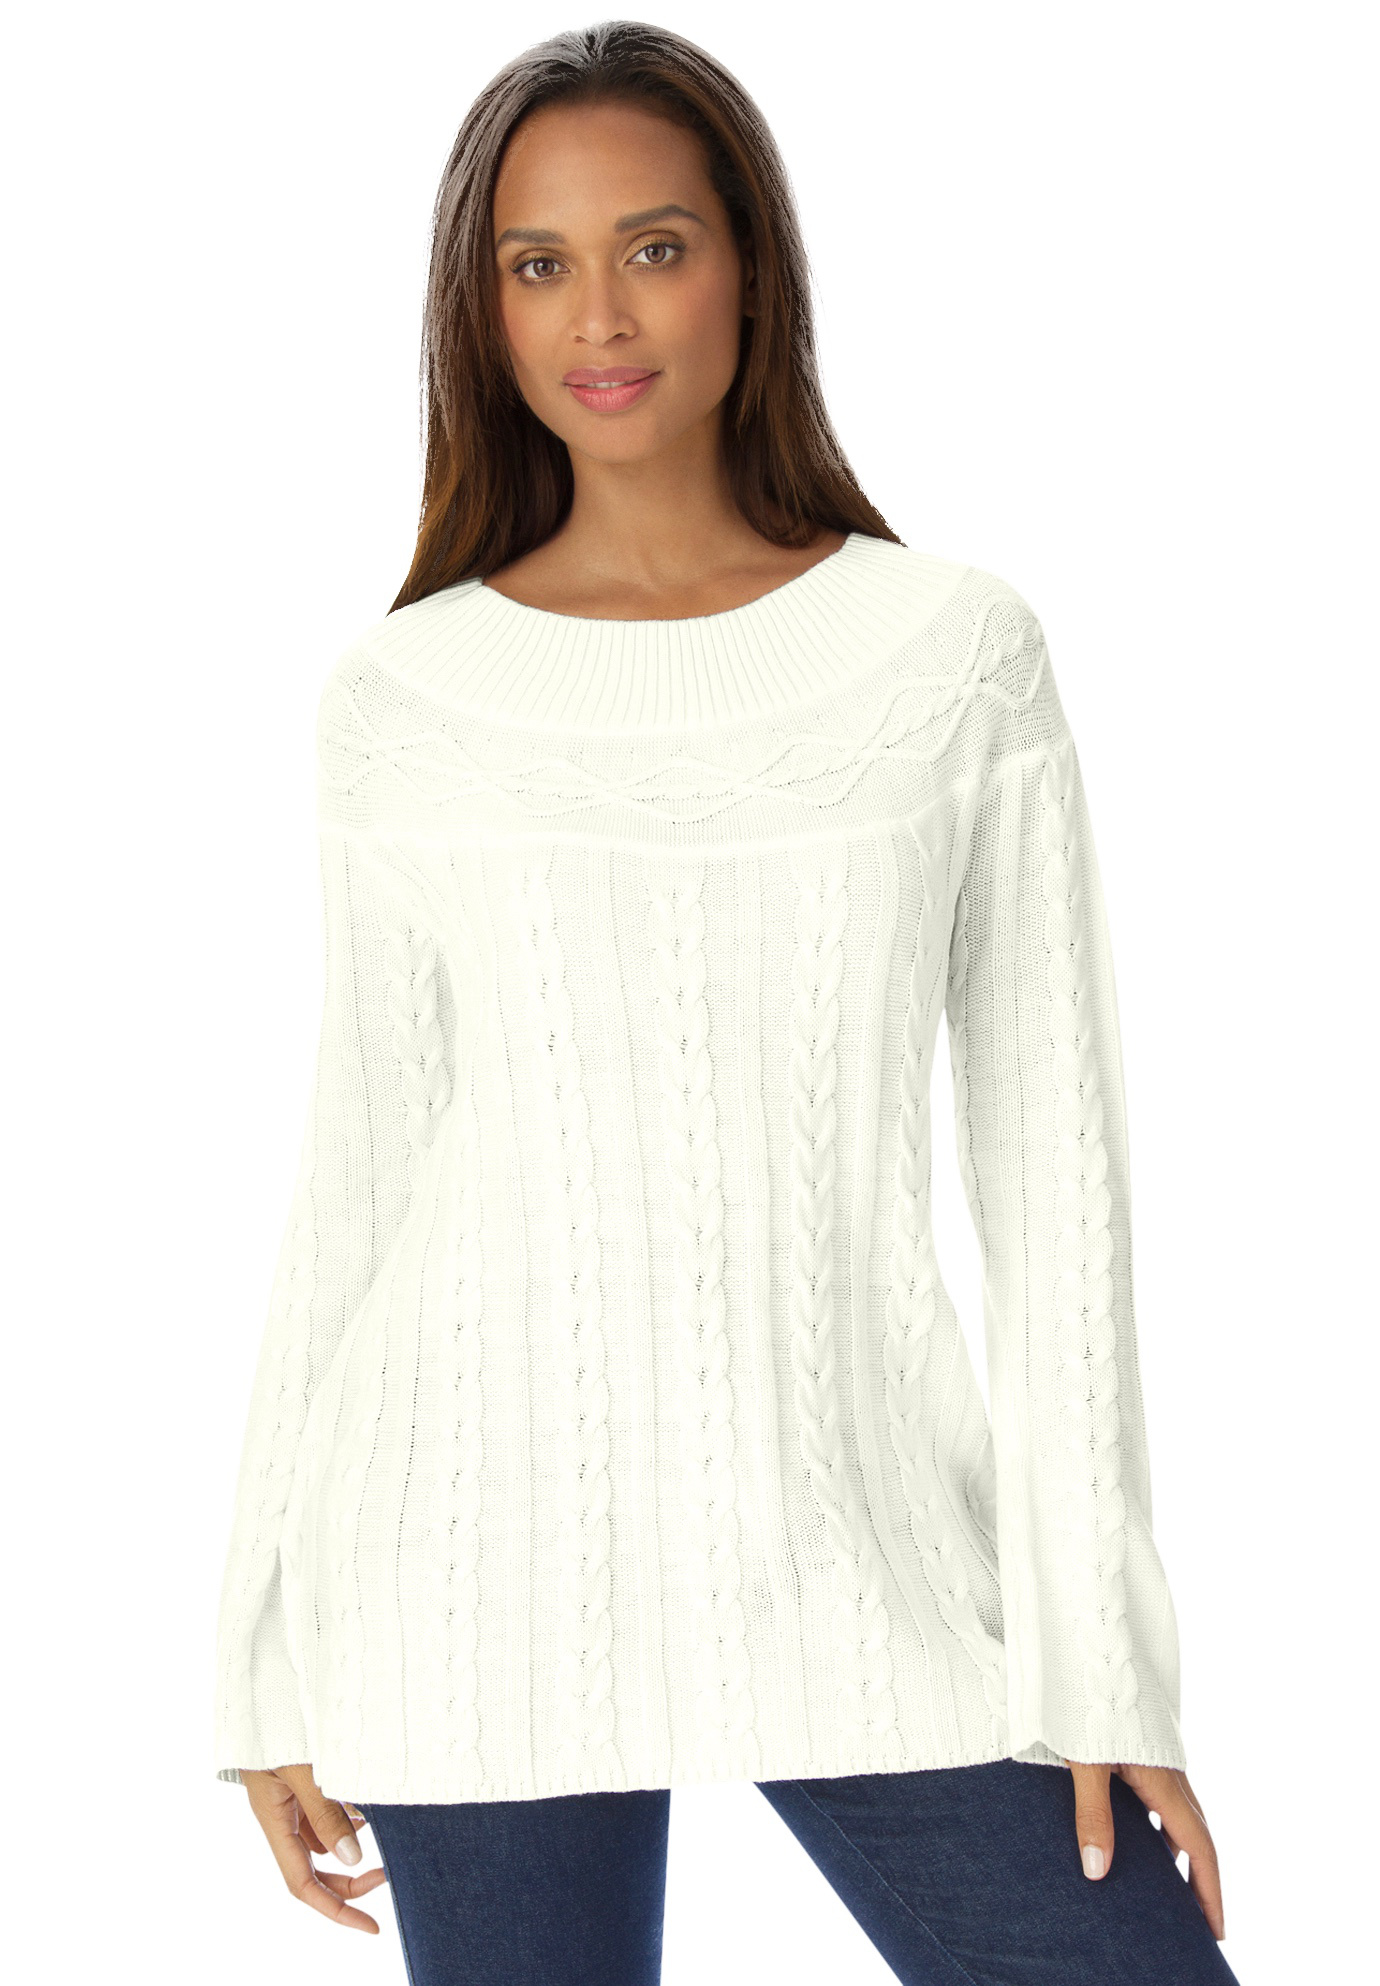 Jessica London Women's Plus Size Cable Sweater Tunic Sweater - image 1 of 4